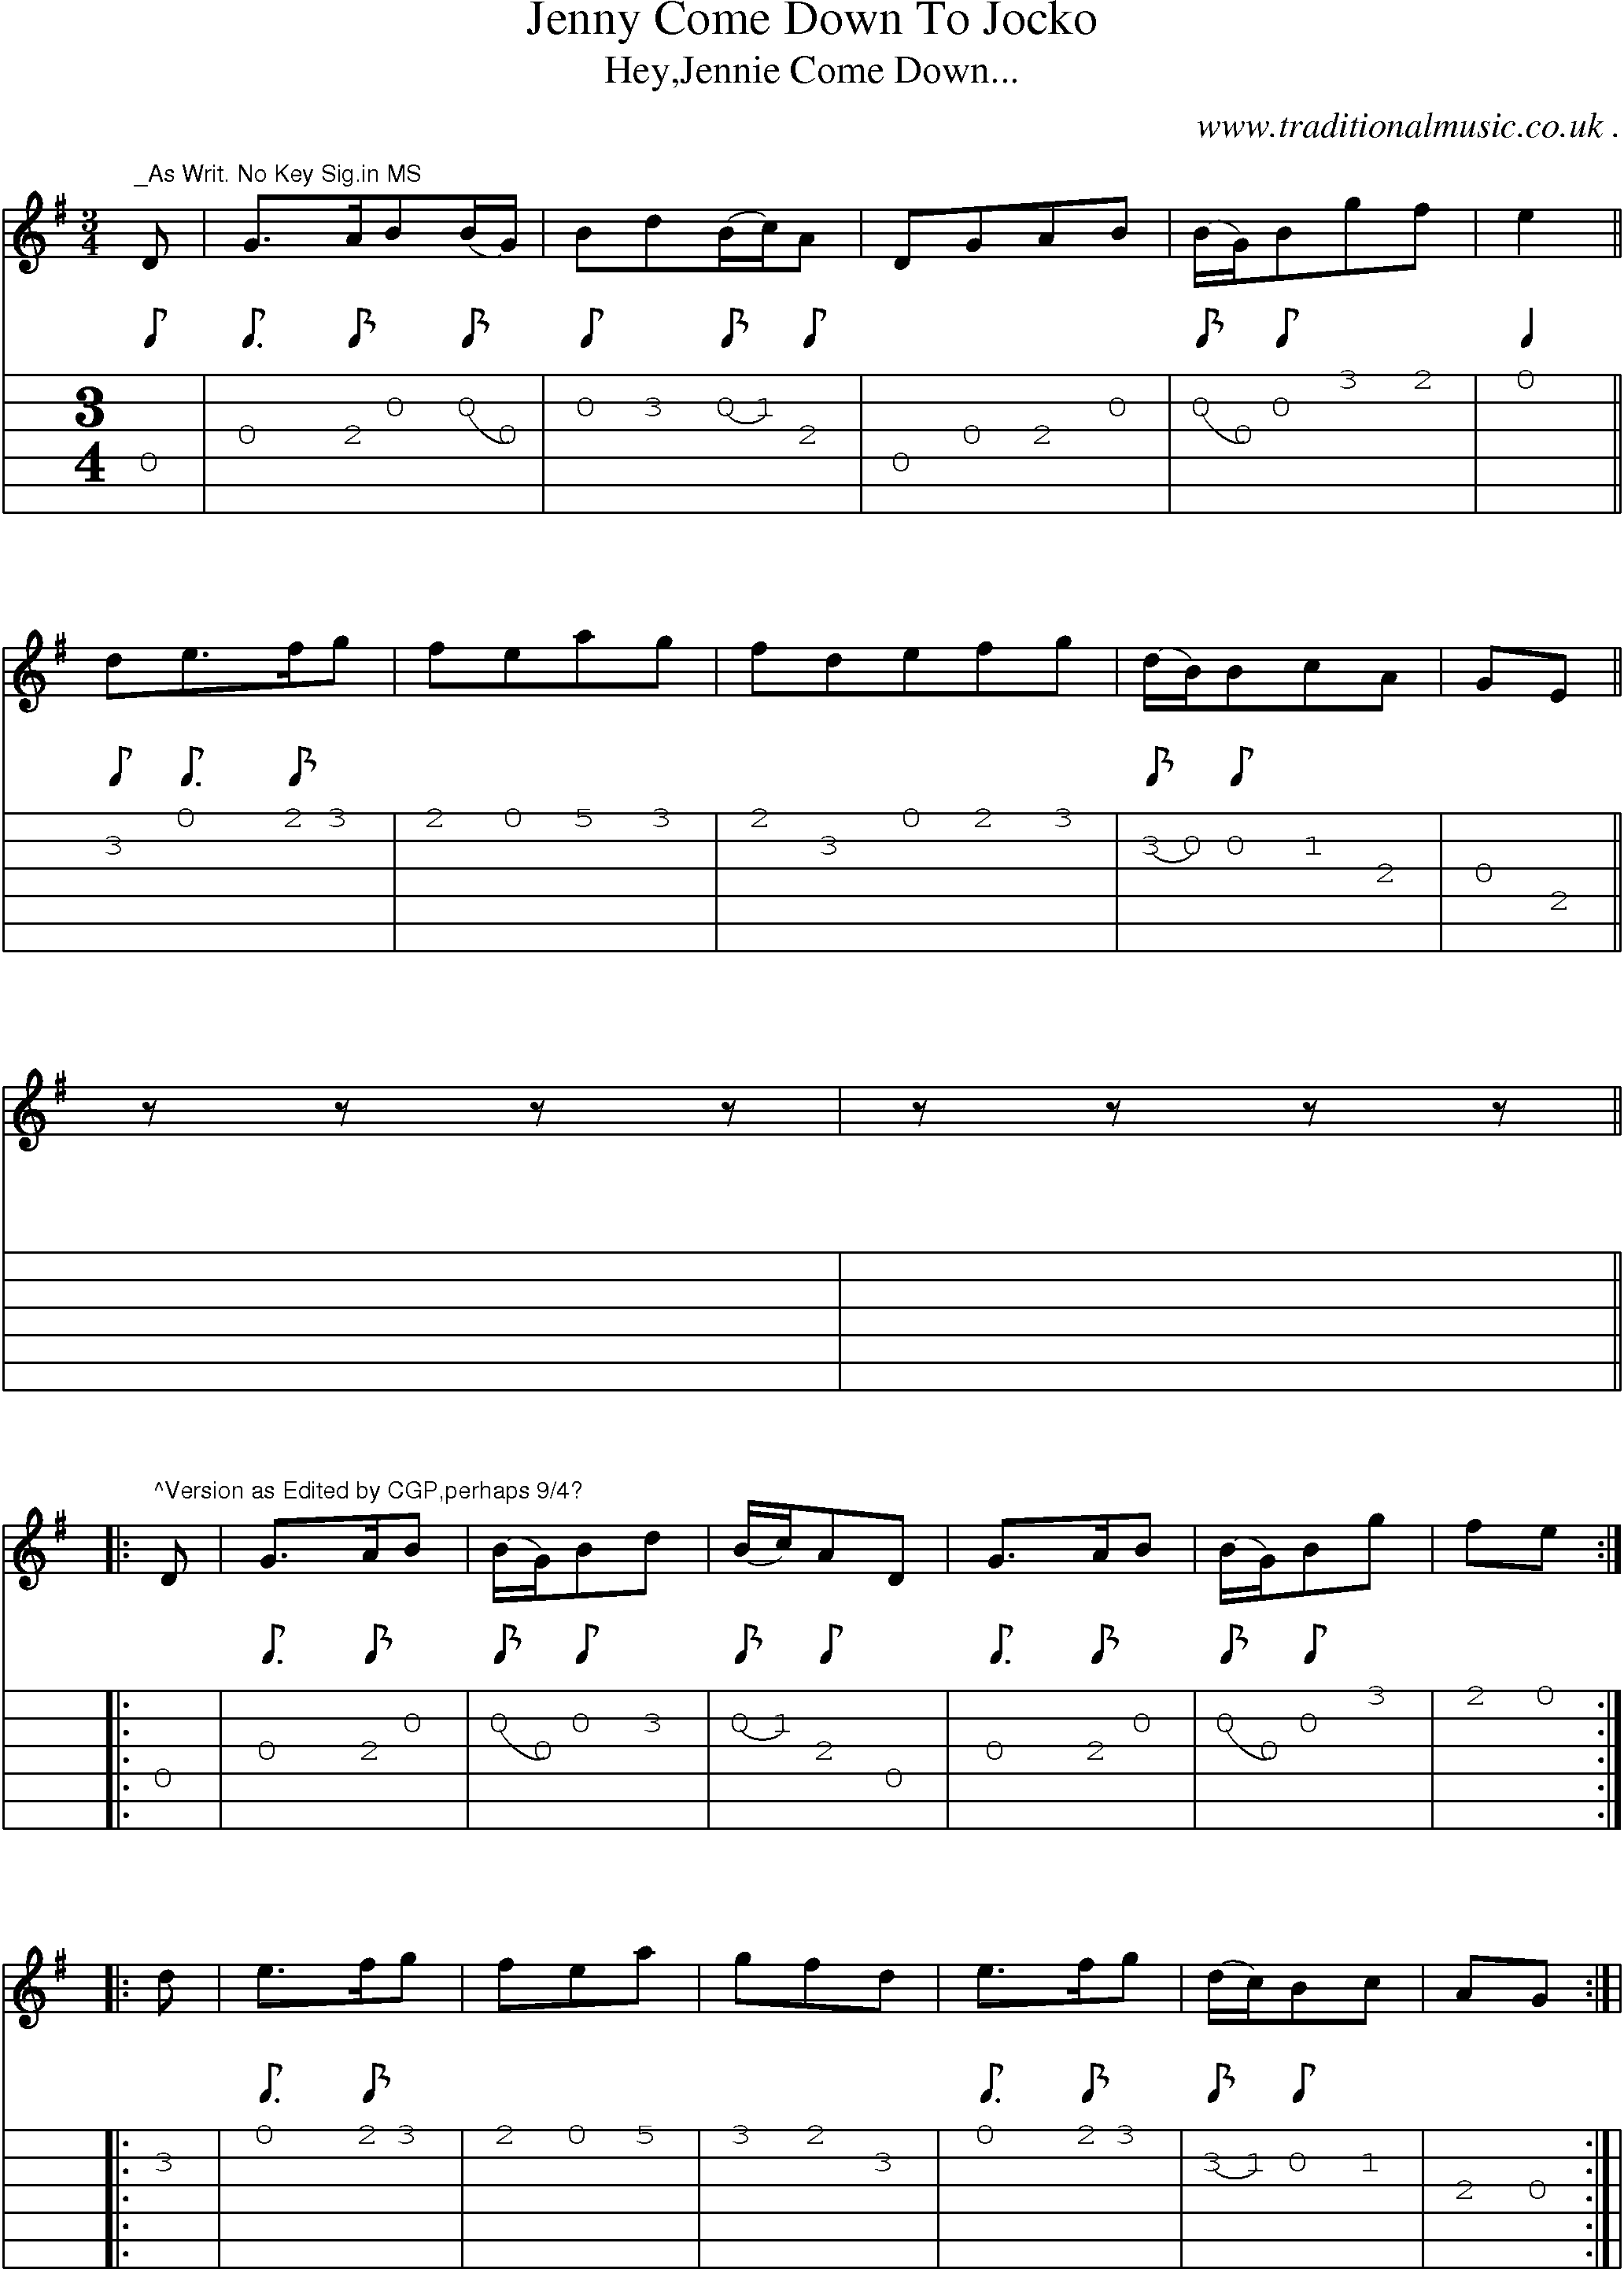 Sheet-Music and Guitar Tabs for Jenny Come Down To Jocko